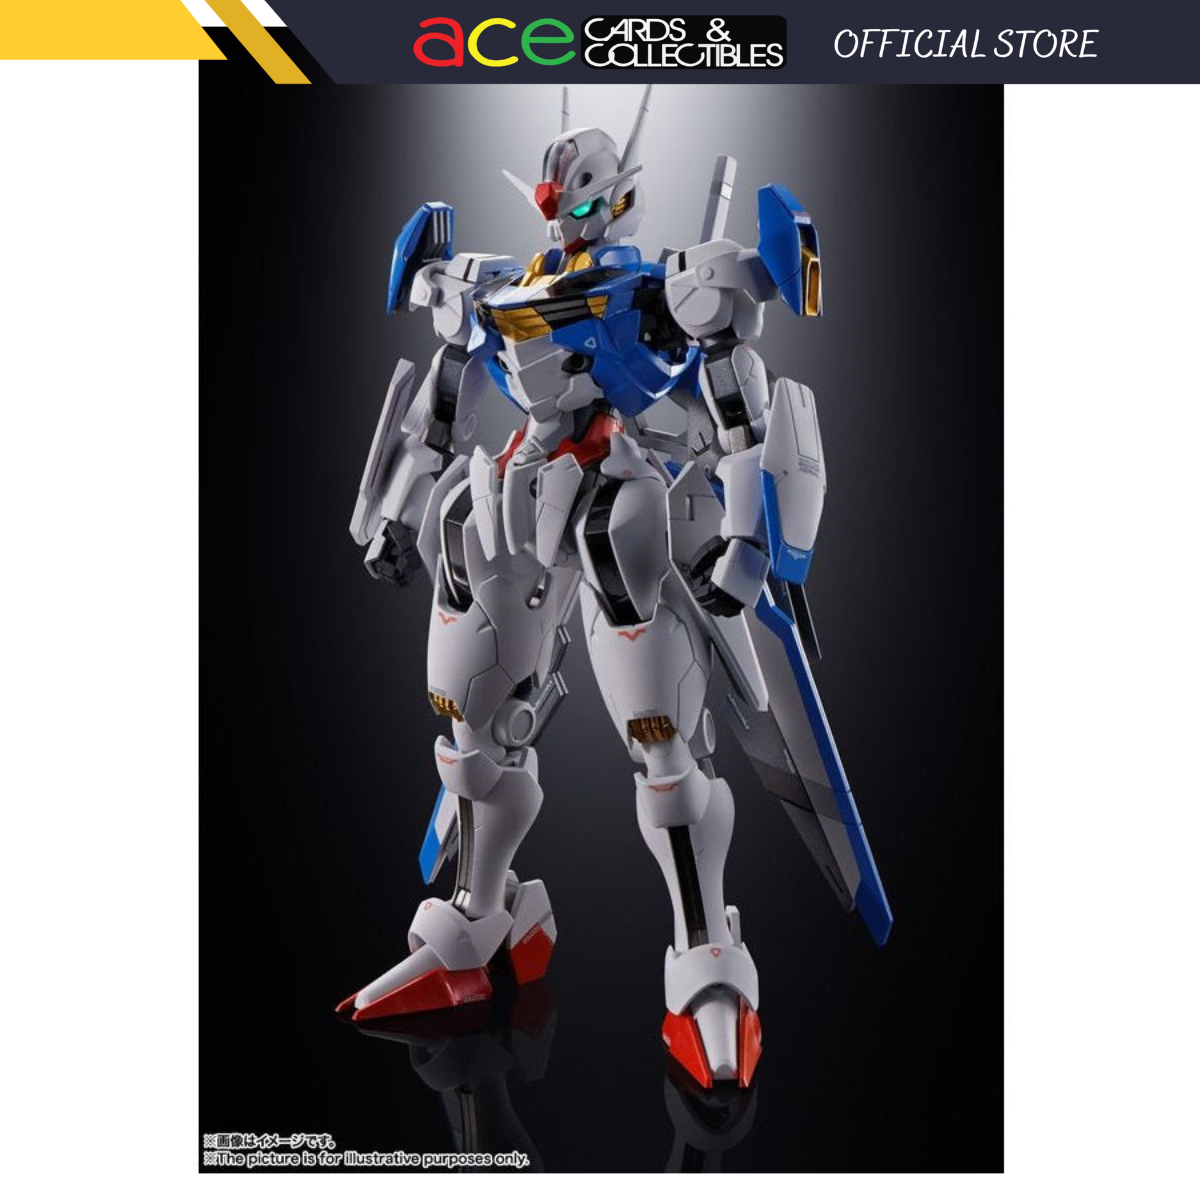 Mobile Suite Gundam: The Witch From Mercury "Chogokin Gundam Aerial" (Completed)-Tamashii-Ace Cards & Collectibles